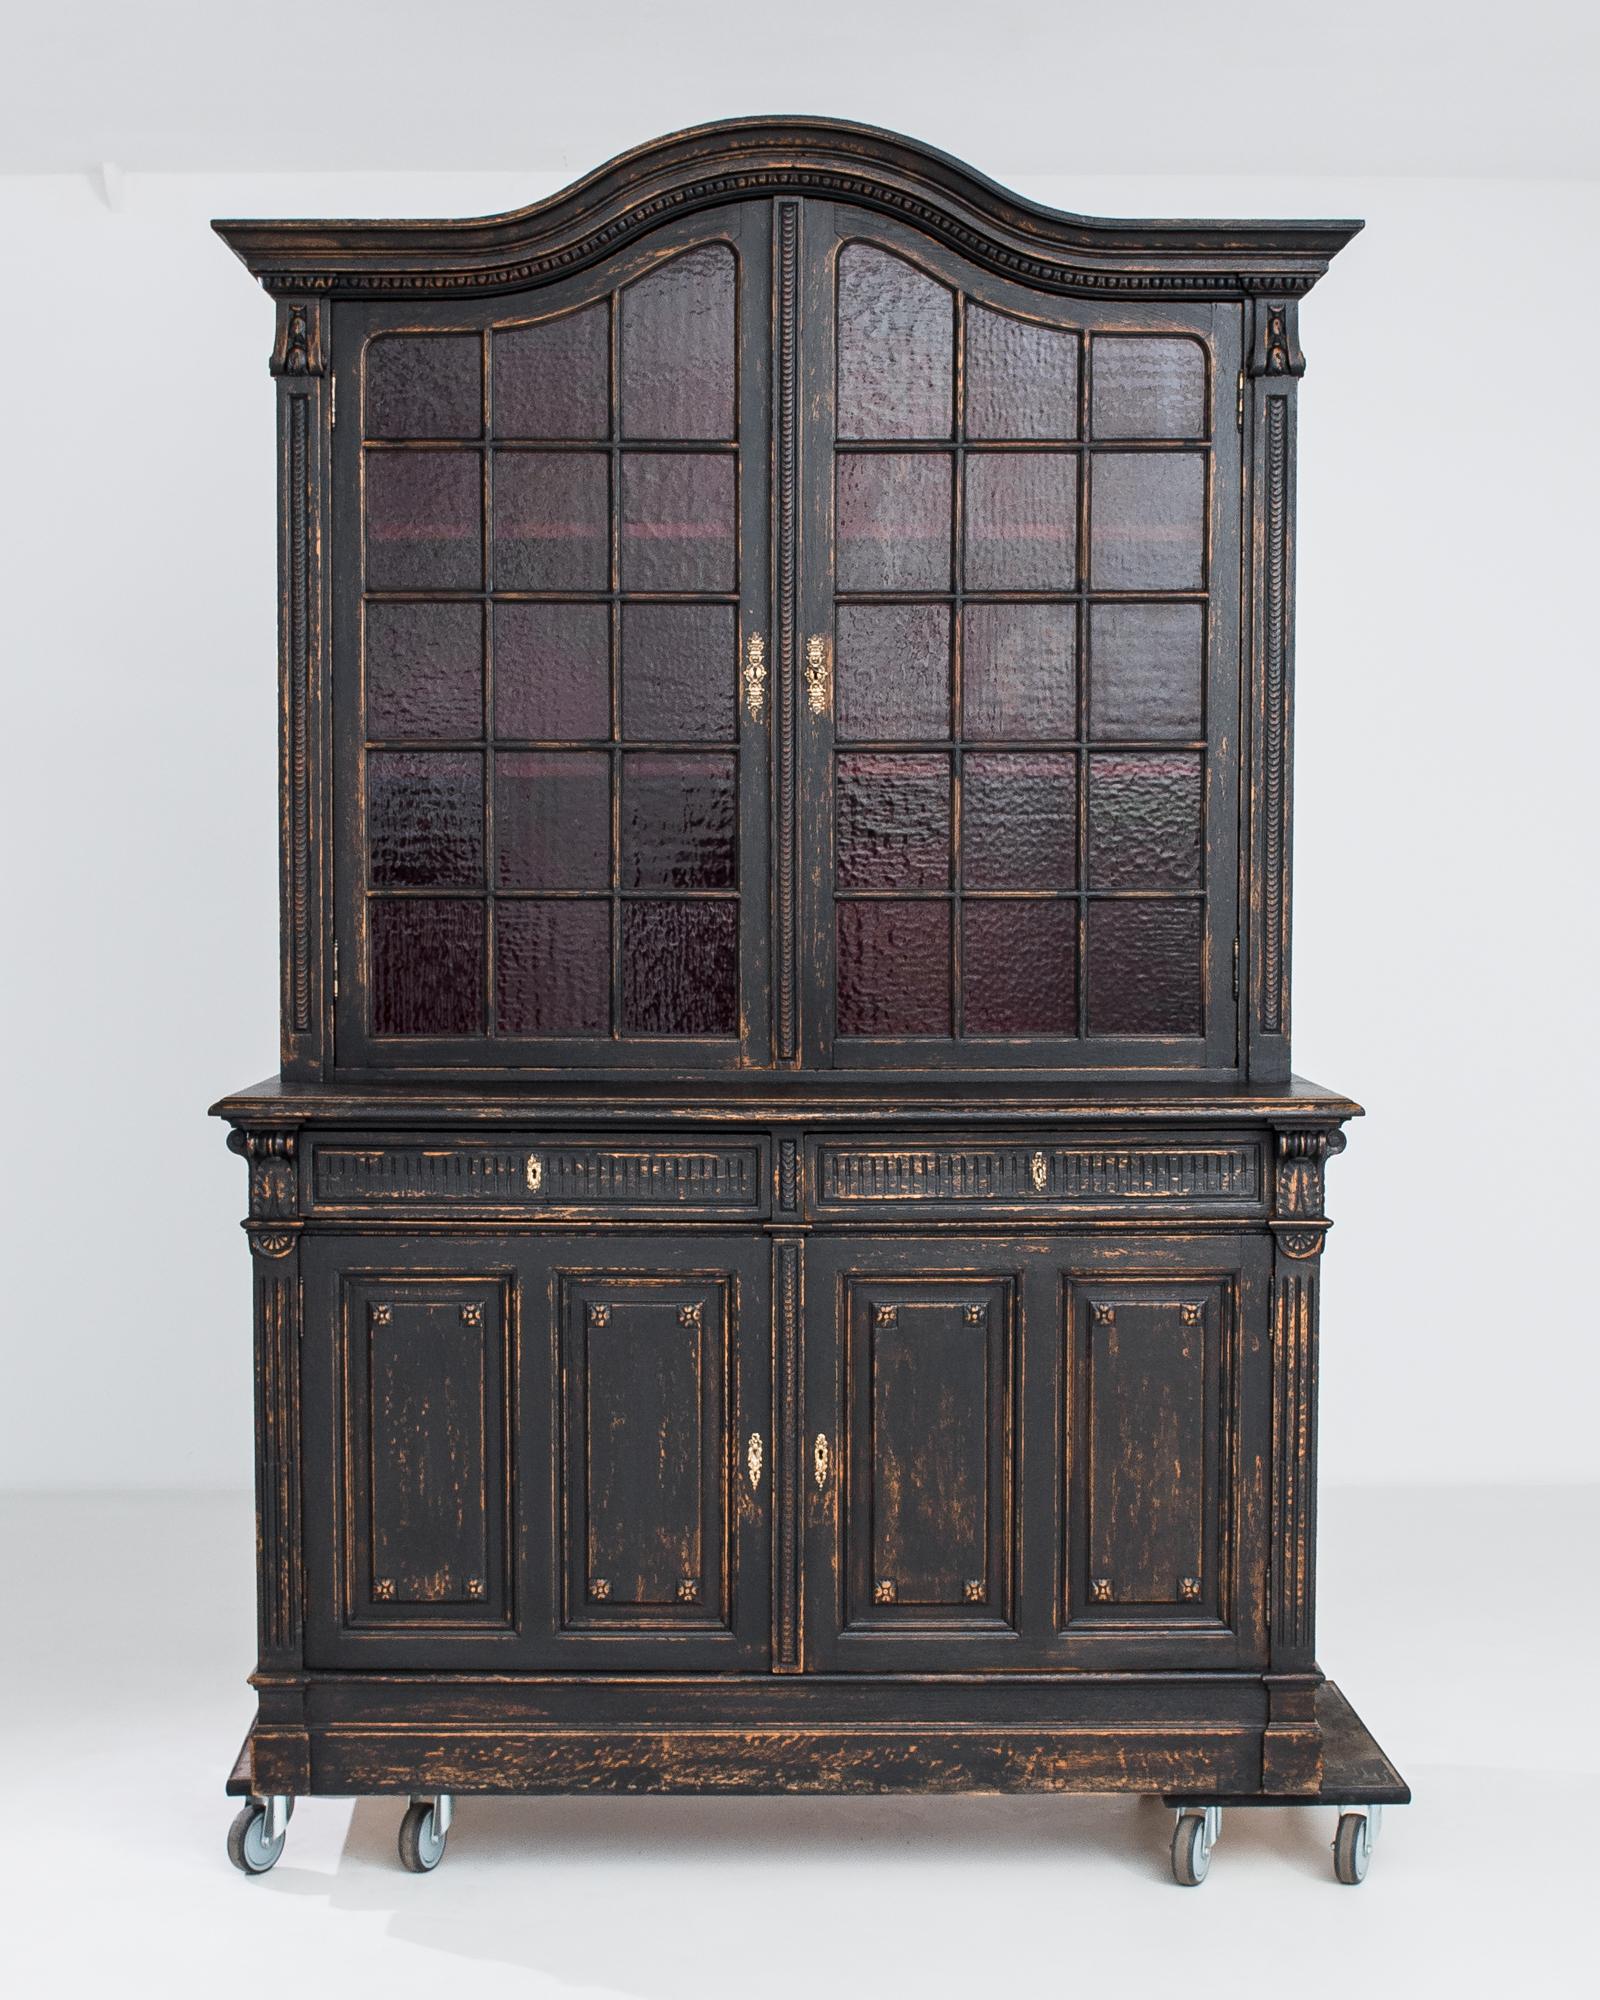 A wooden vitrine from France, produced circa 1900. A stunning antique vitrine with original patina, featuring an arched double door cabinet fronted by frosted glass panels, a lower double cabinet, and a row of two sliding drawers. The oak absorbs a